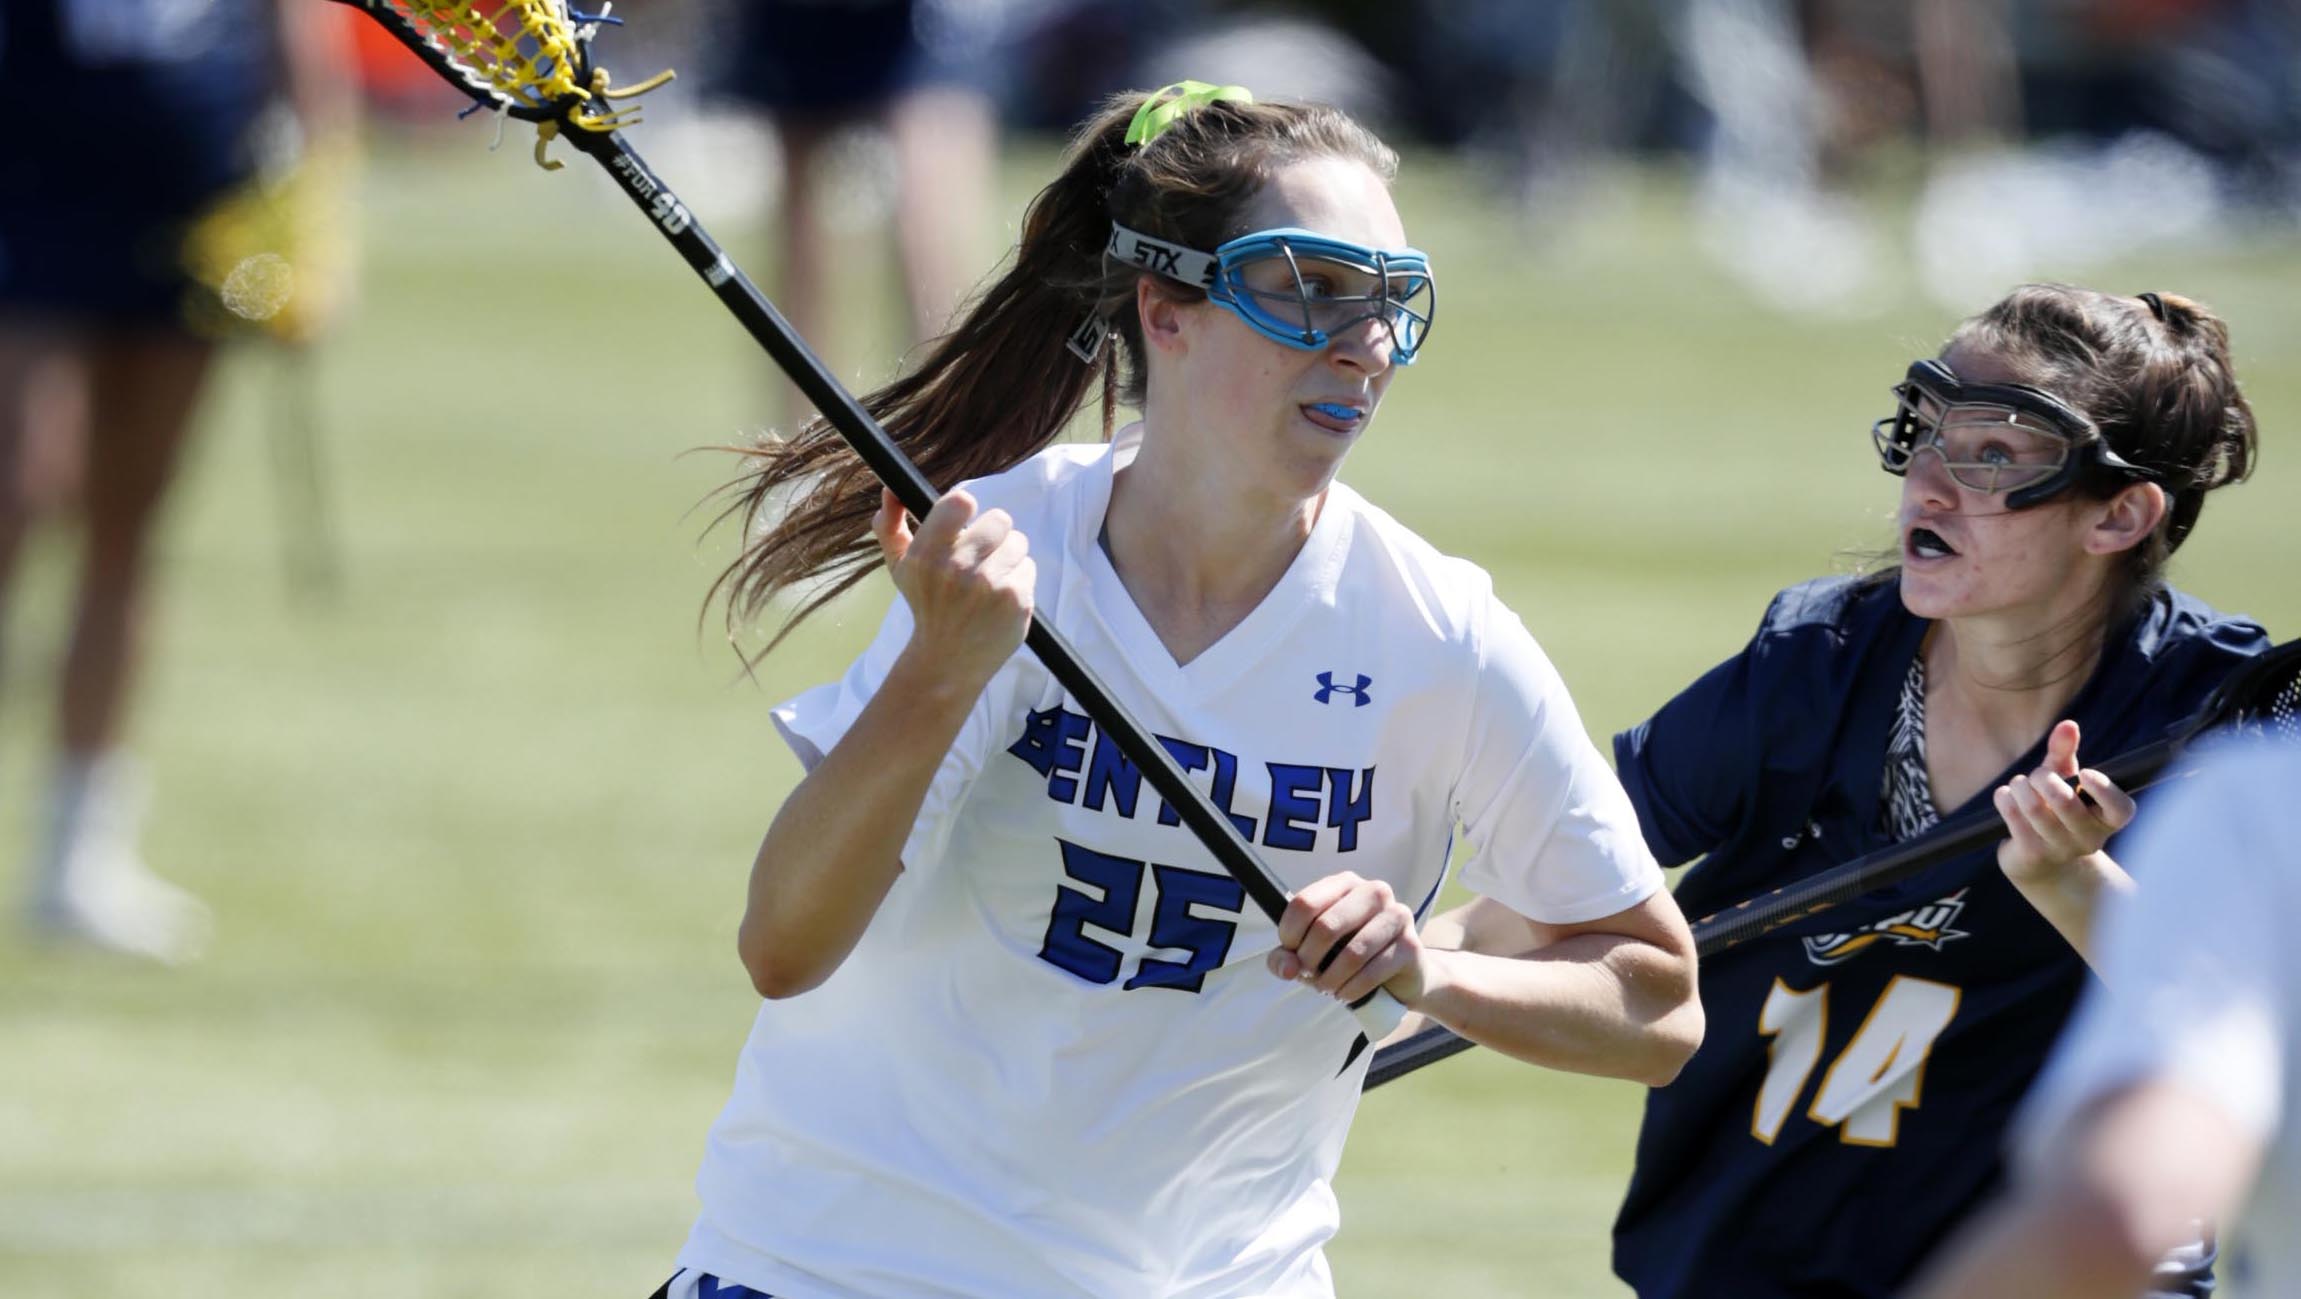 Affolter’s Overtime Goal Sends Bentley to 10-9 Win over Assumption, and to Divisional Finals